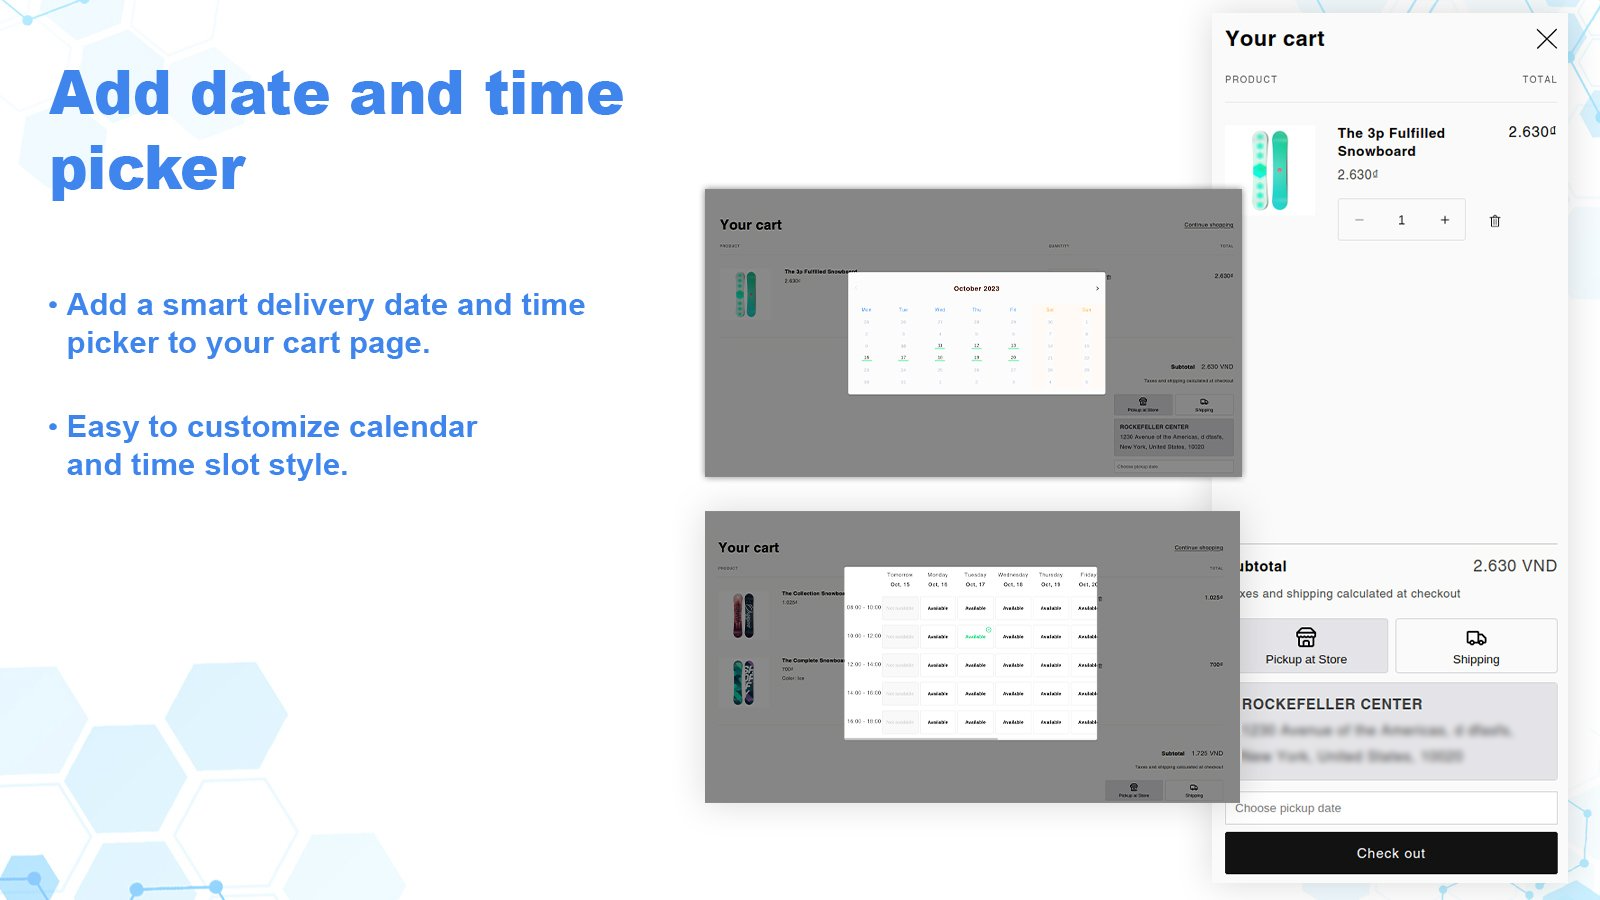 Add pickup date and time picker